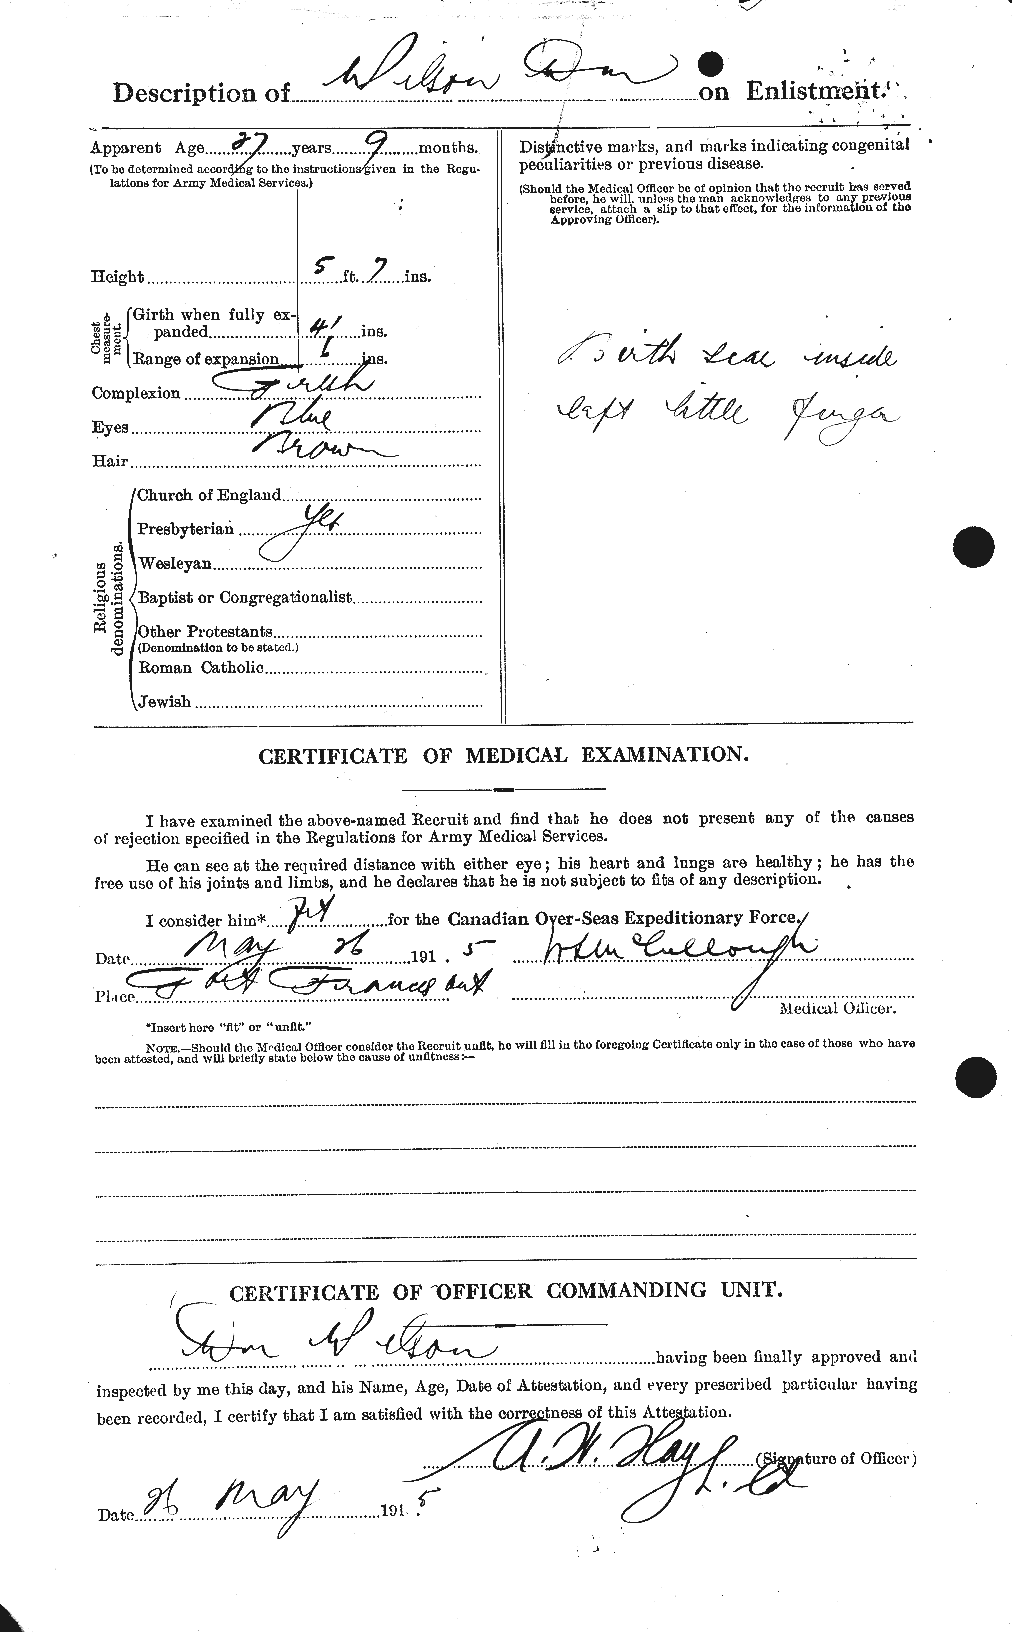 Personnel Records of the First World War - CEF 681835b